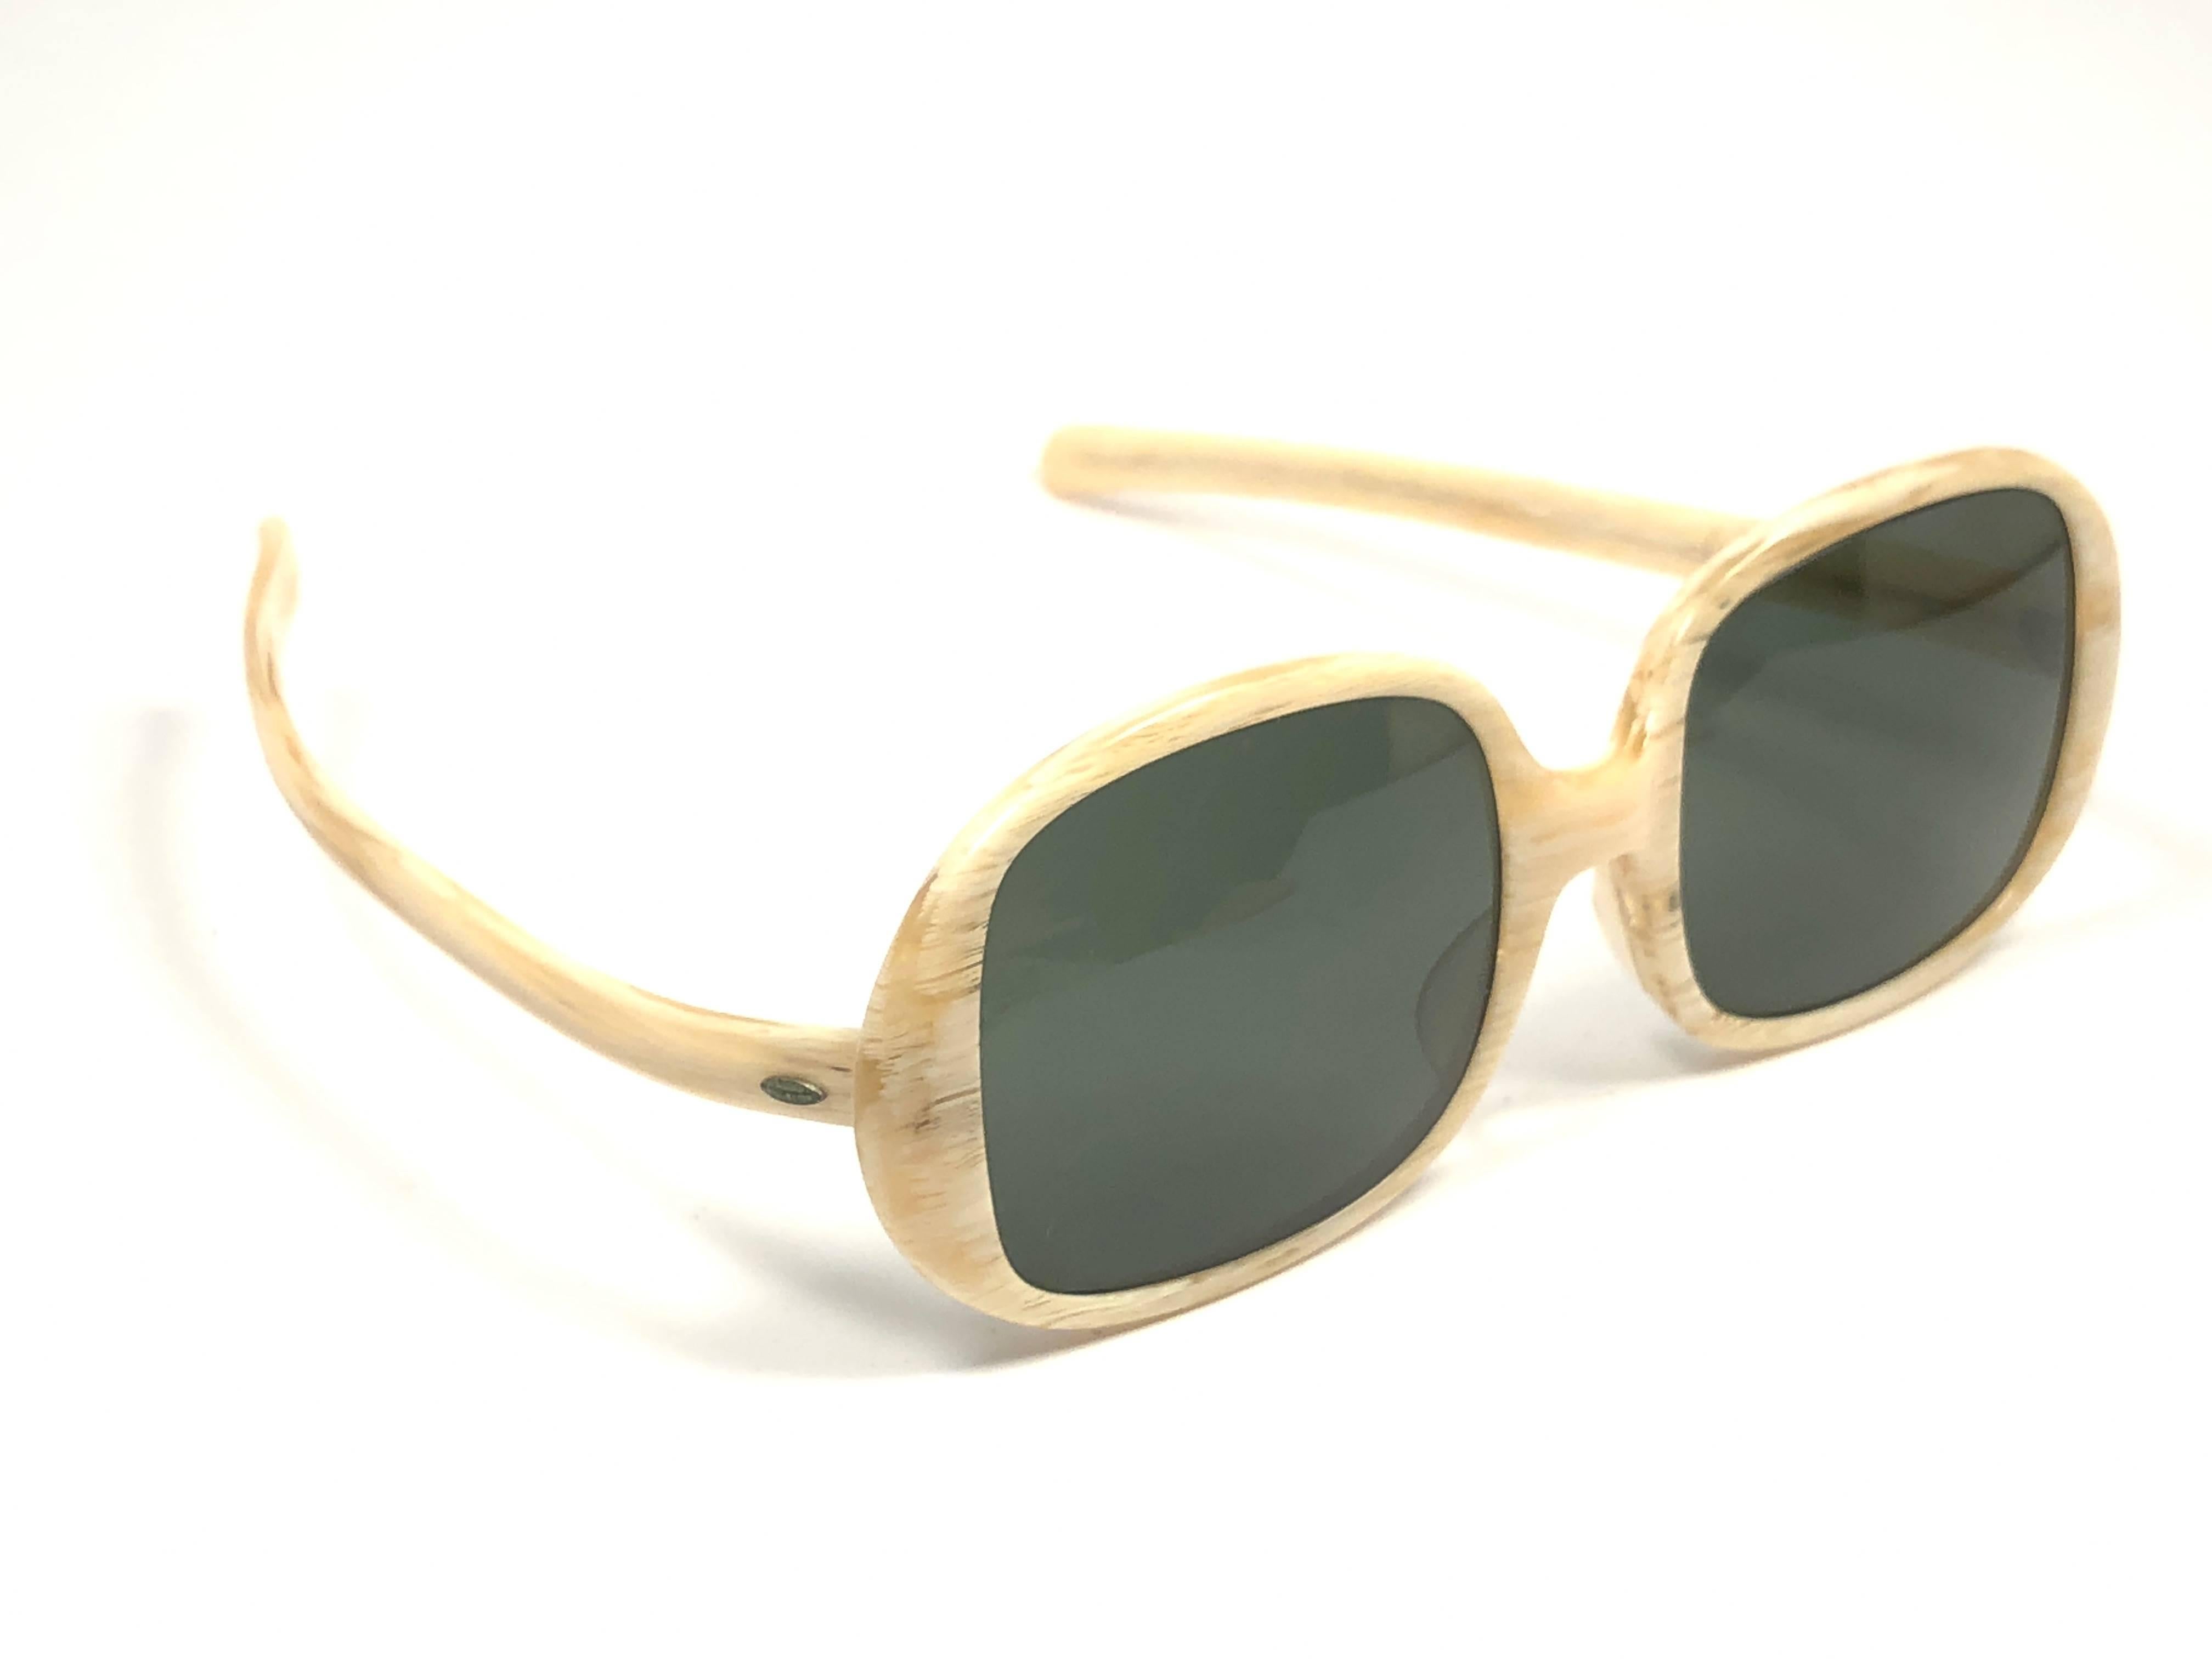 New classic Kilaine in Beige and Clear combination. G15 grey lenses non B&L. 

Please notice that this item is nearly 50 years old and could show some storage wear. New, ever worn or displayed. Made in USA.